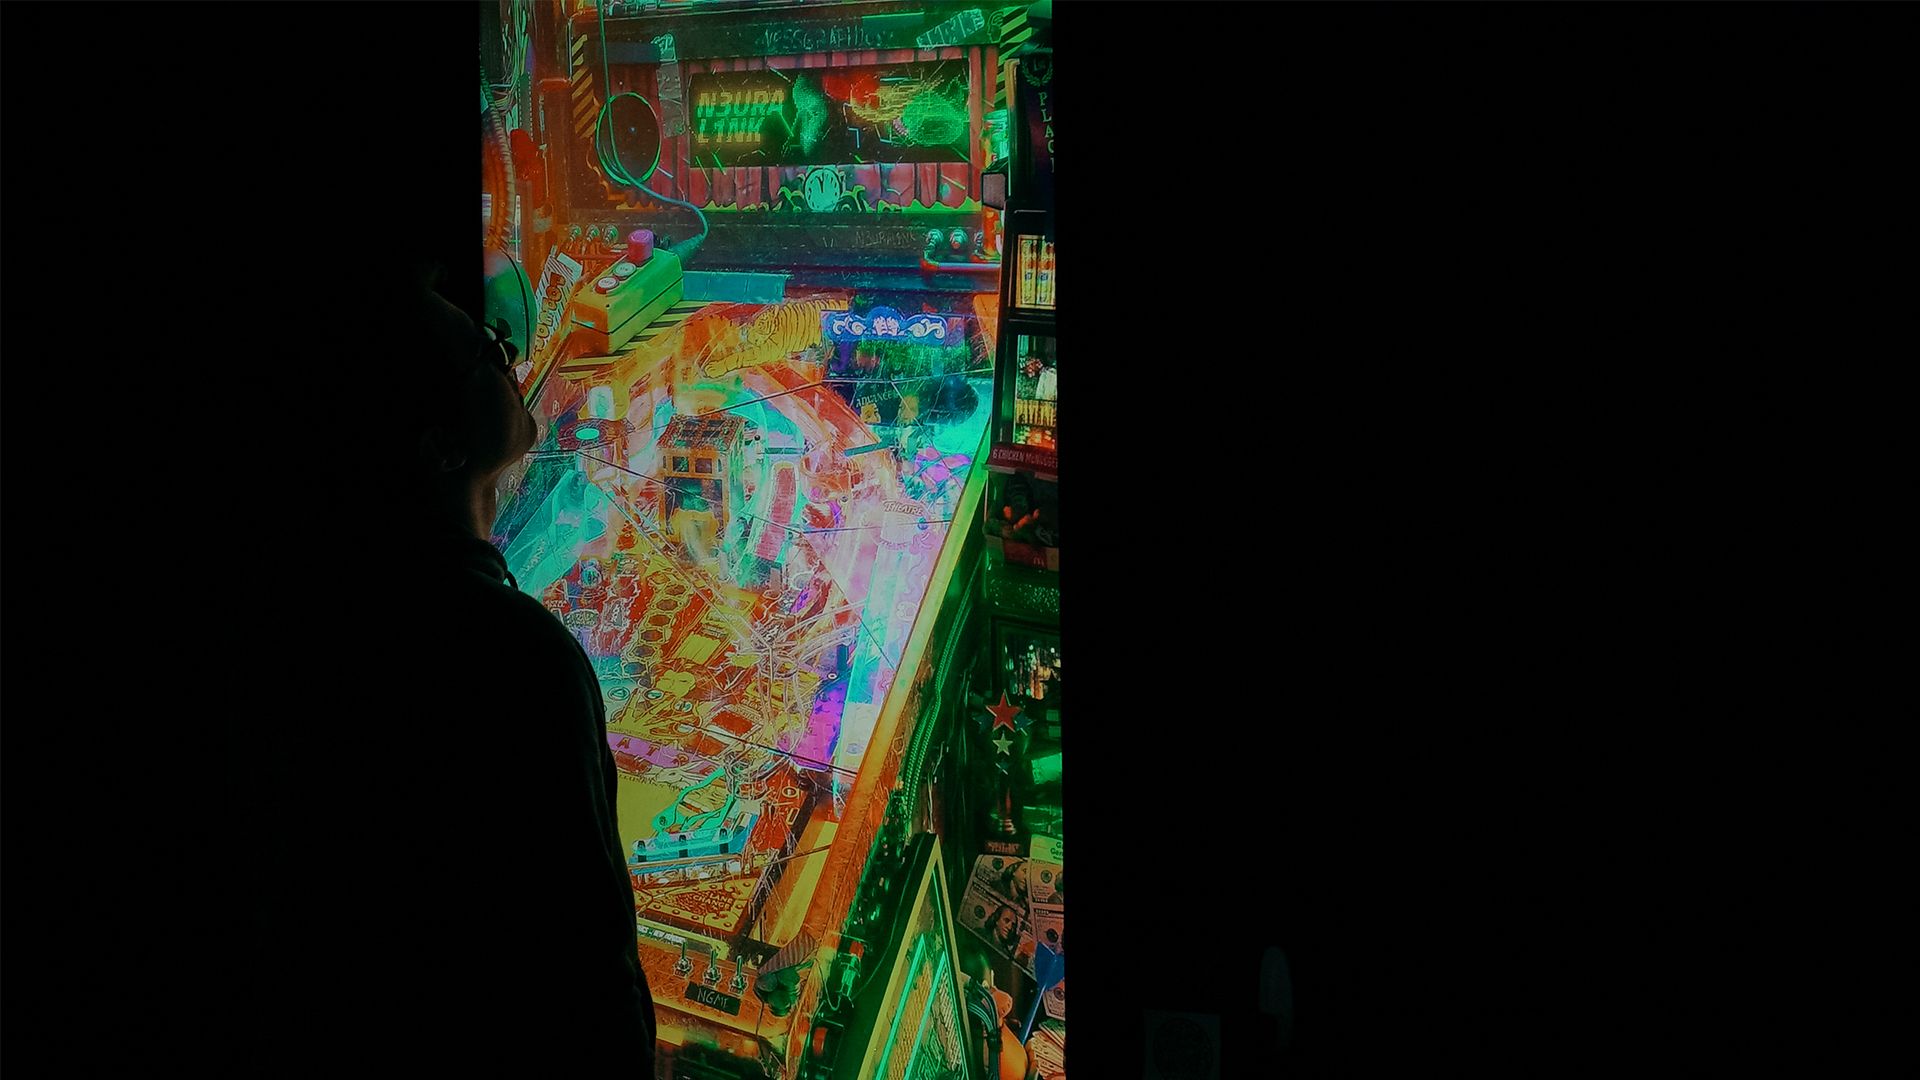 Alex Ness in a dark room looking at a colourful digital artwork